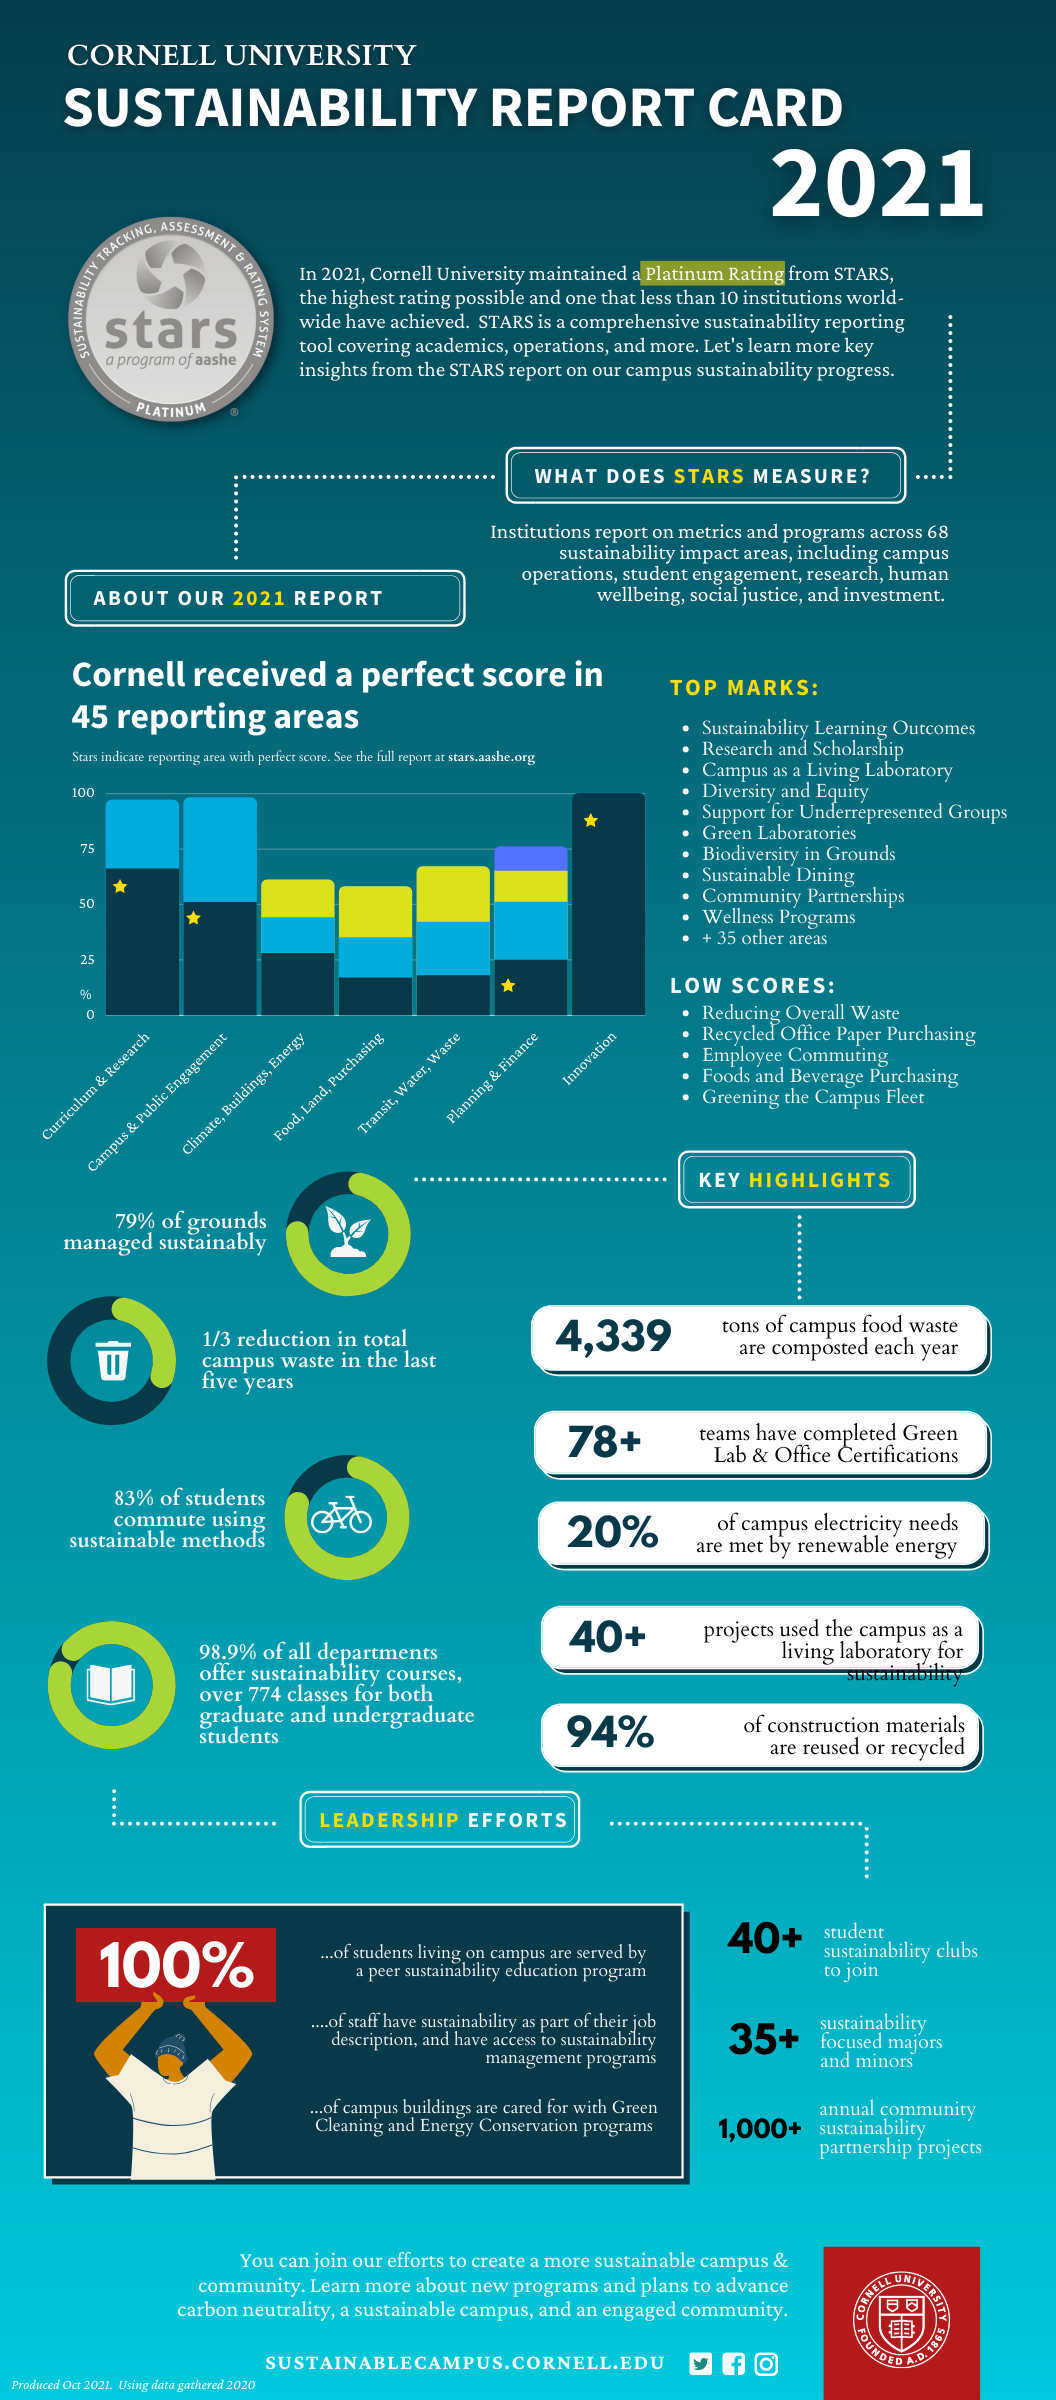 Infographic summarizing key report highlights shared above